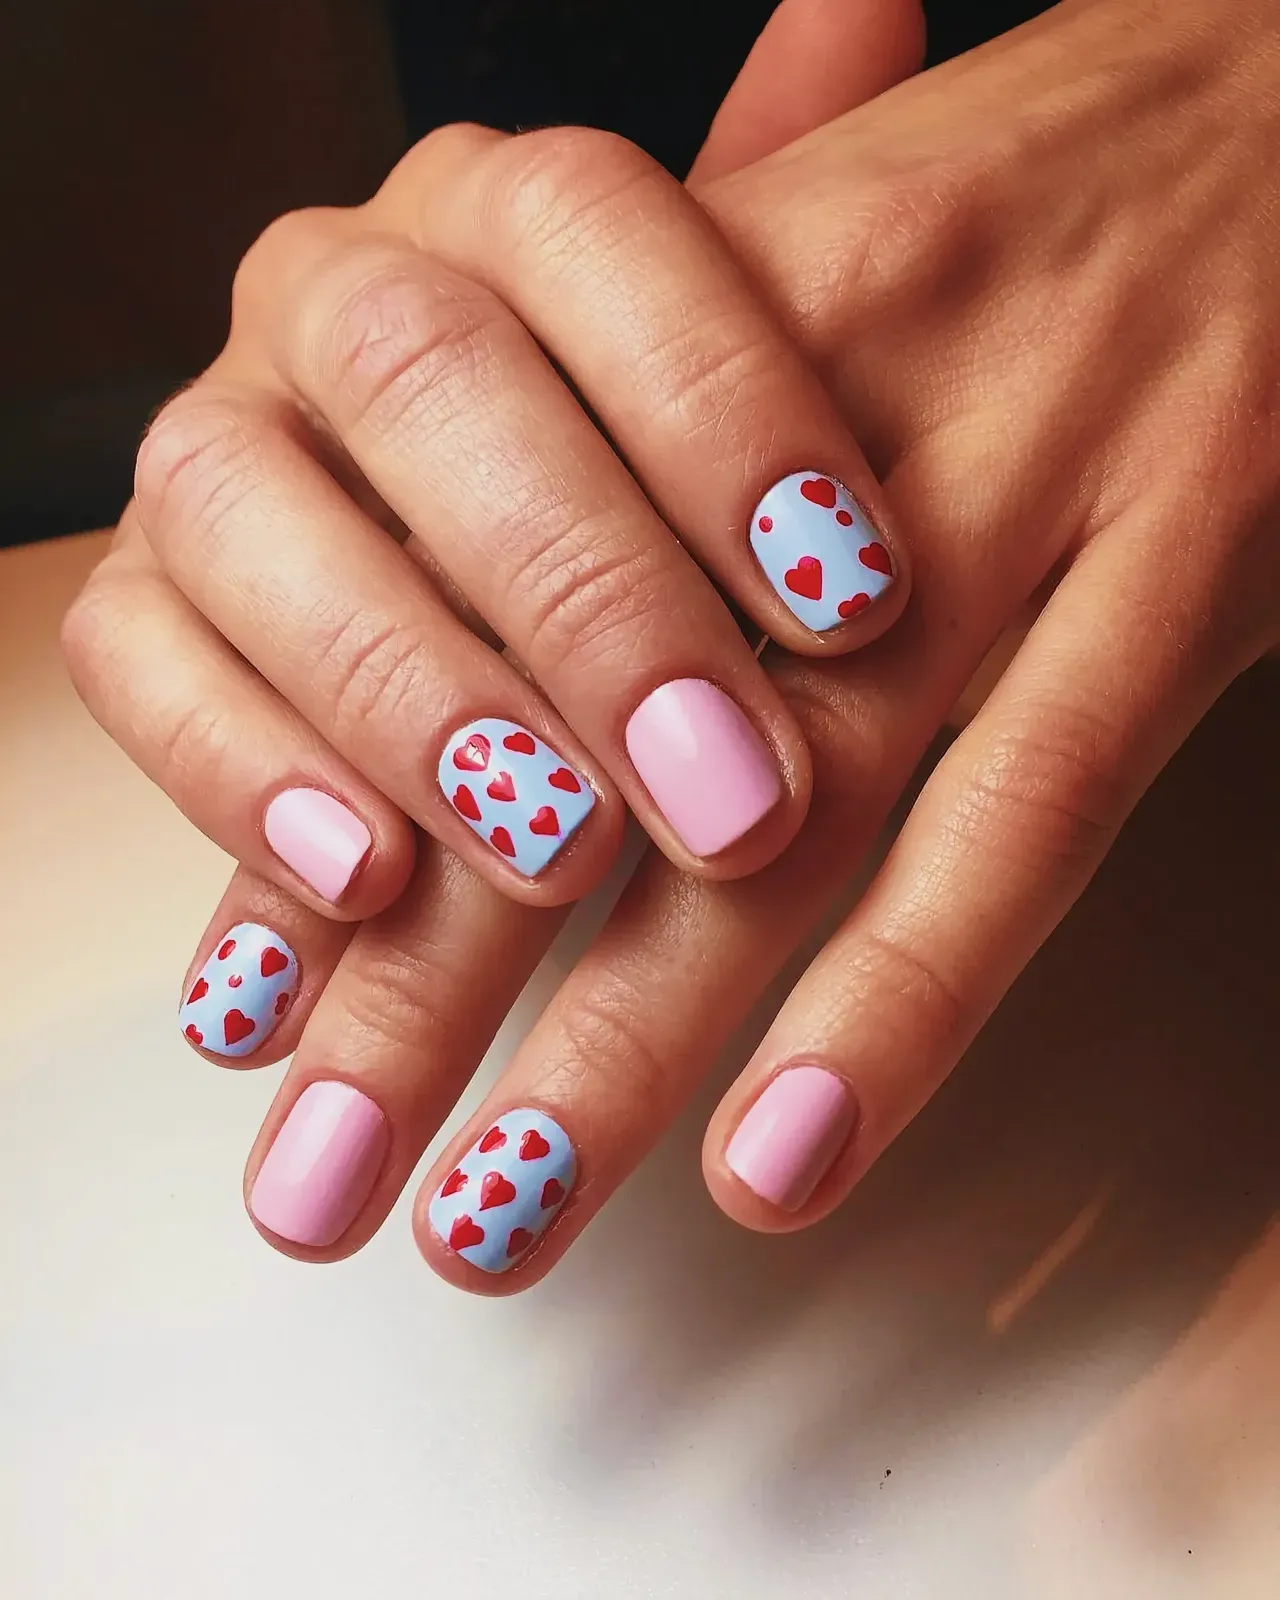 Close-up of meticulously painted fingernails with red heart designs